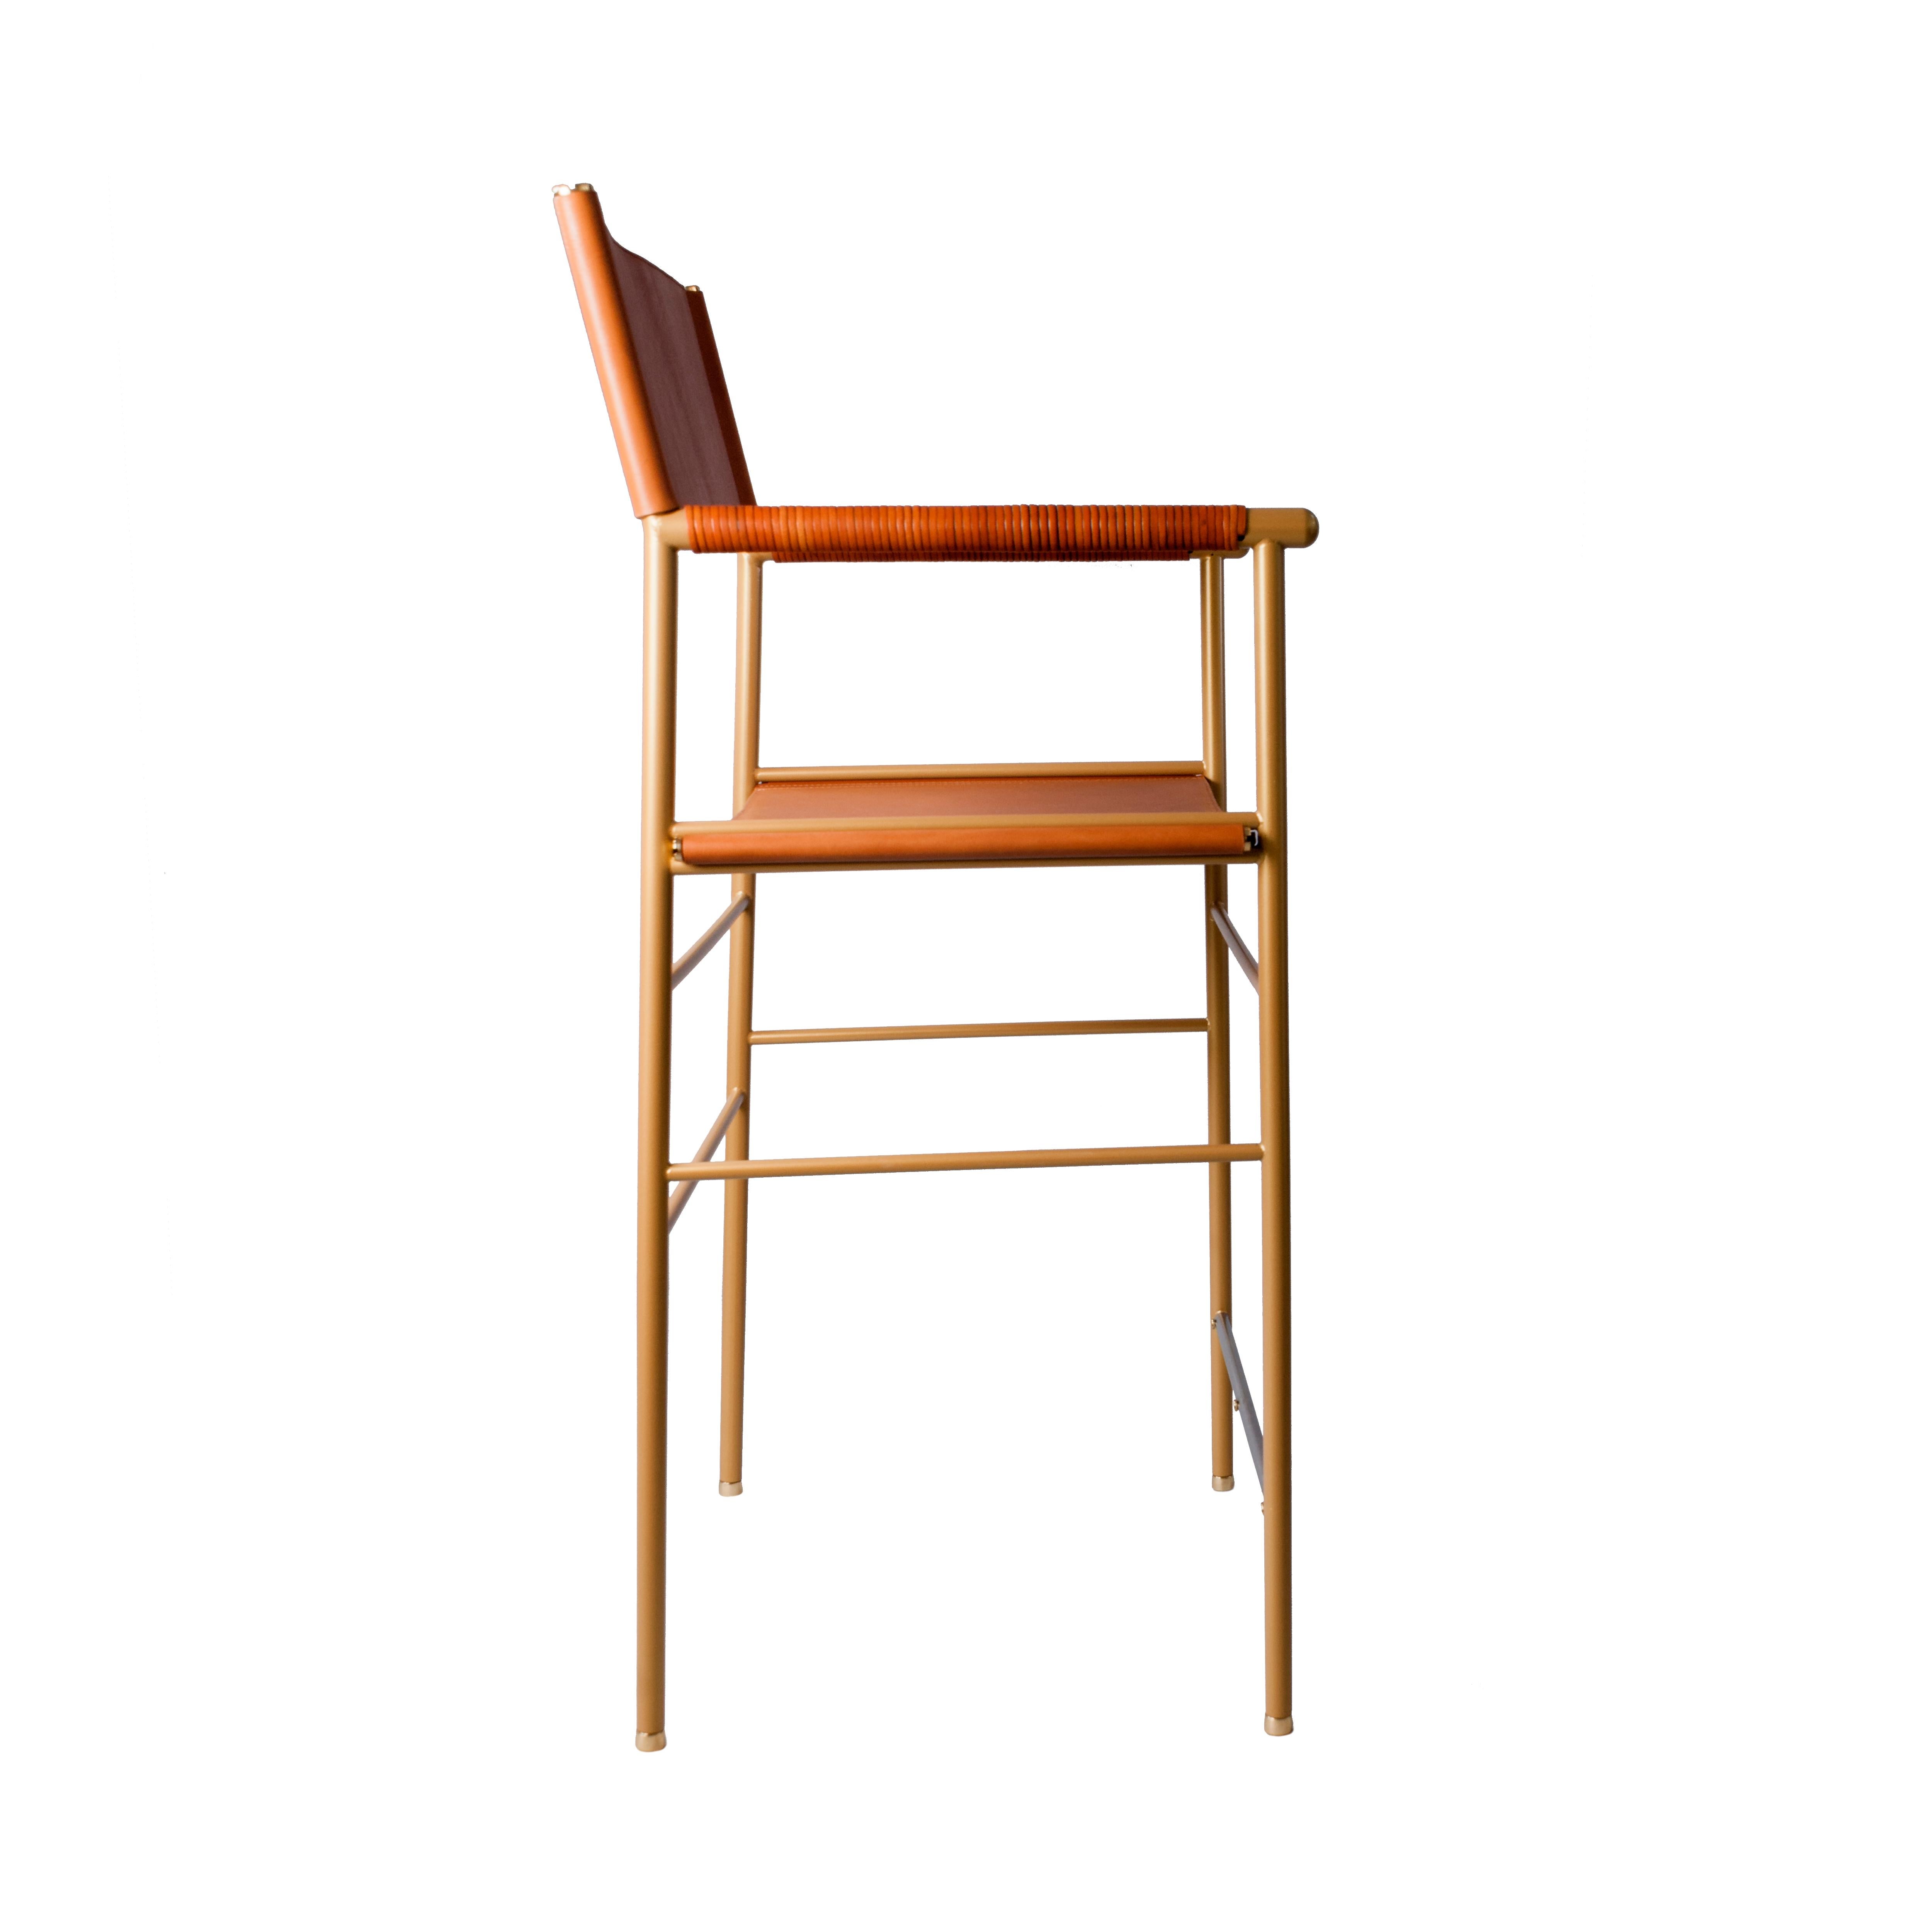 Modern Set of 4 Counter Bar Stools w. Backrest - Tan Leather & Aged Brass Powder Coated For Sale